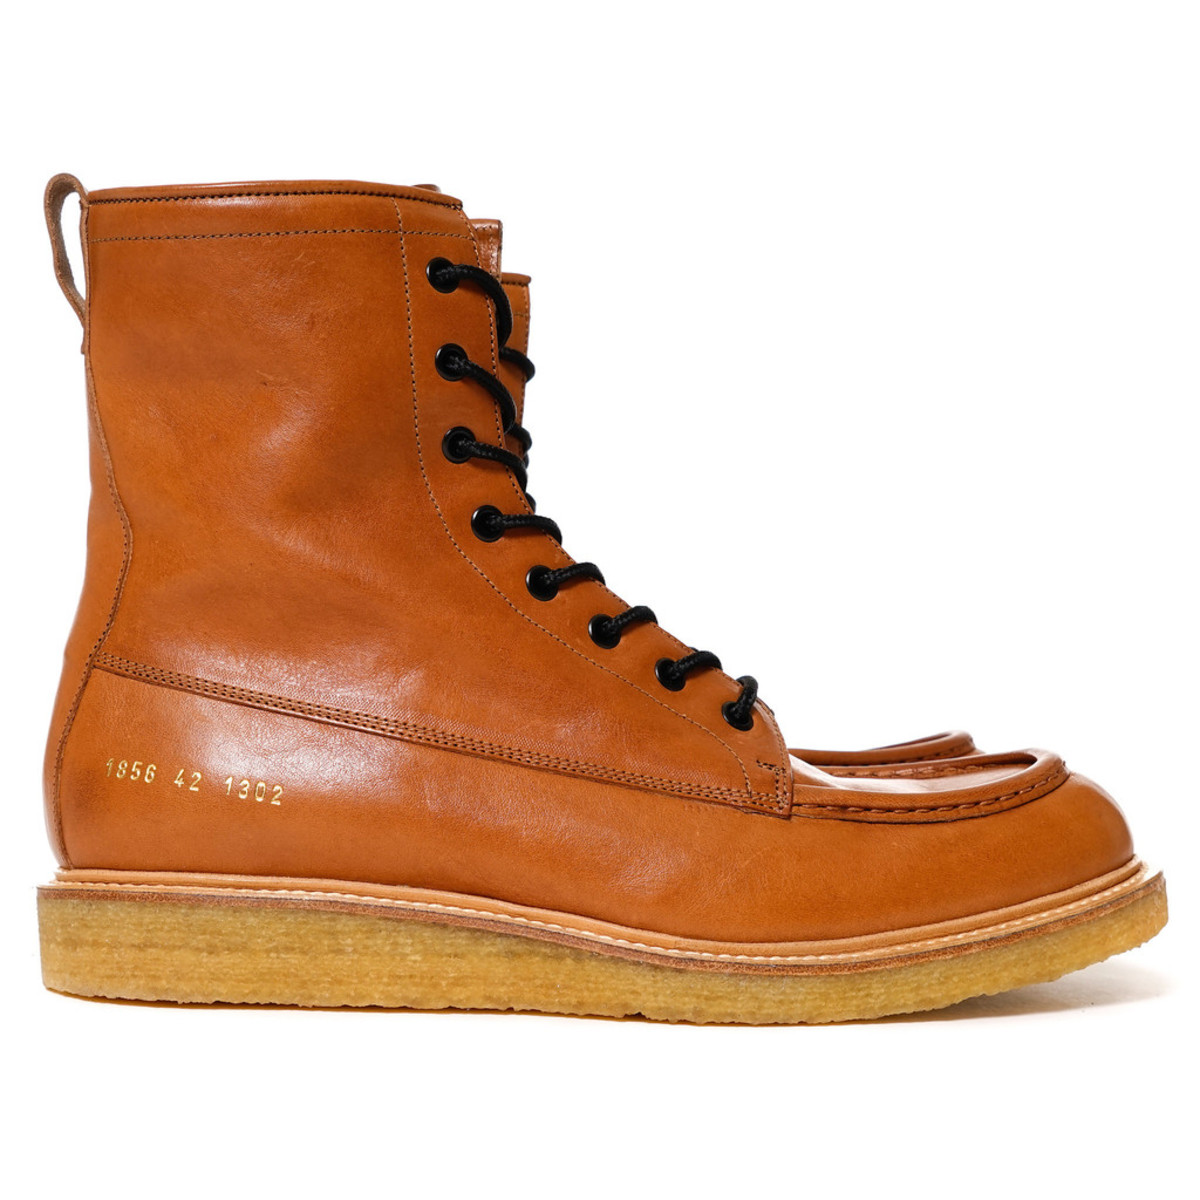 Common Projects Mechanic's Boot - Acquire